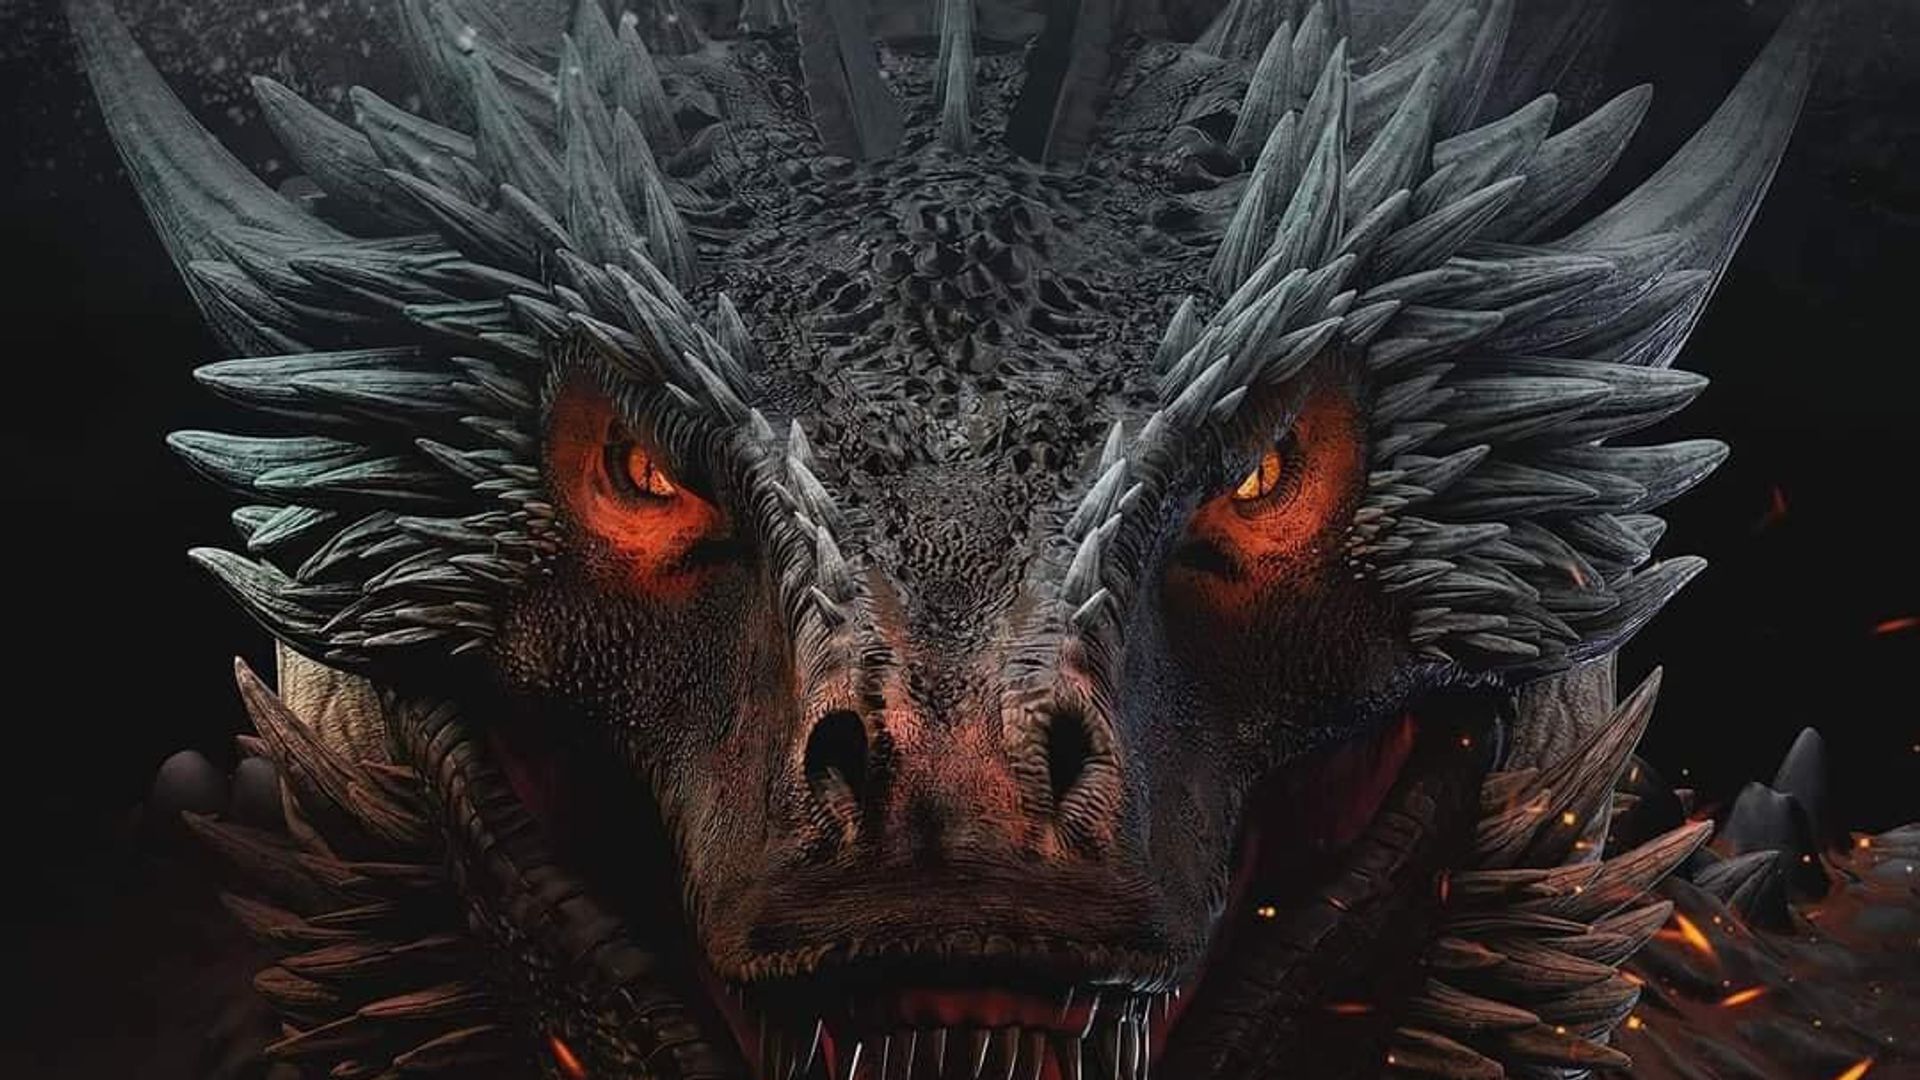 House of the Dragon Wraps Filming Season 1: When Will It Premiere?